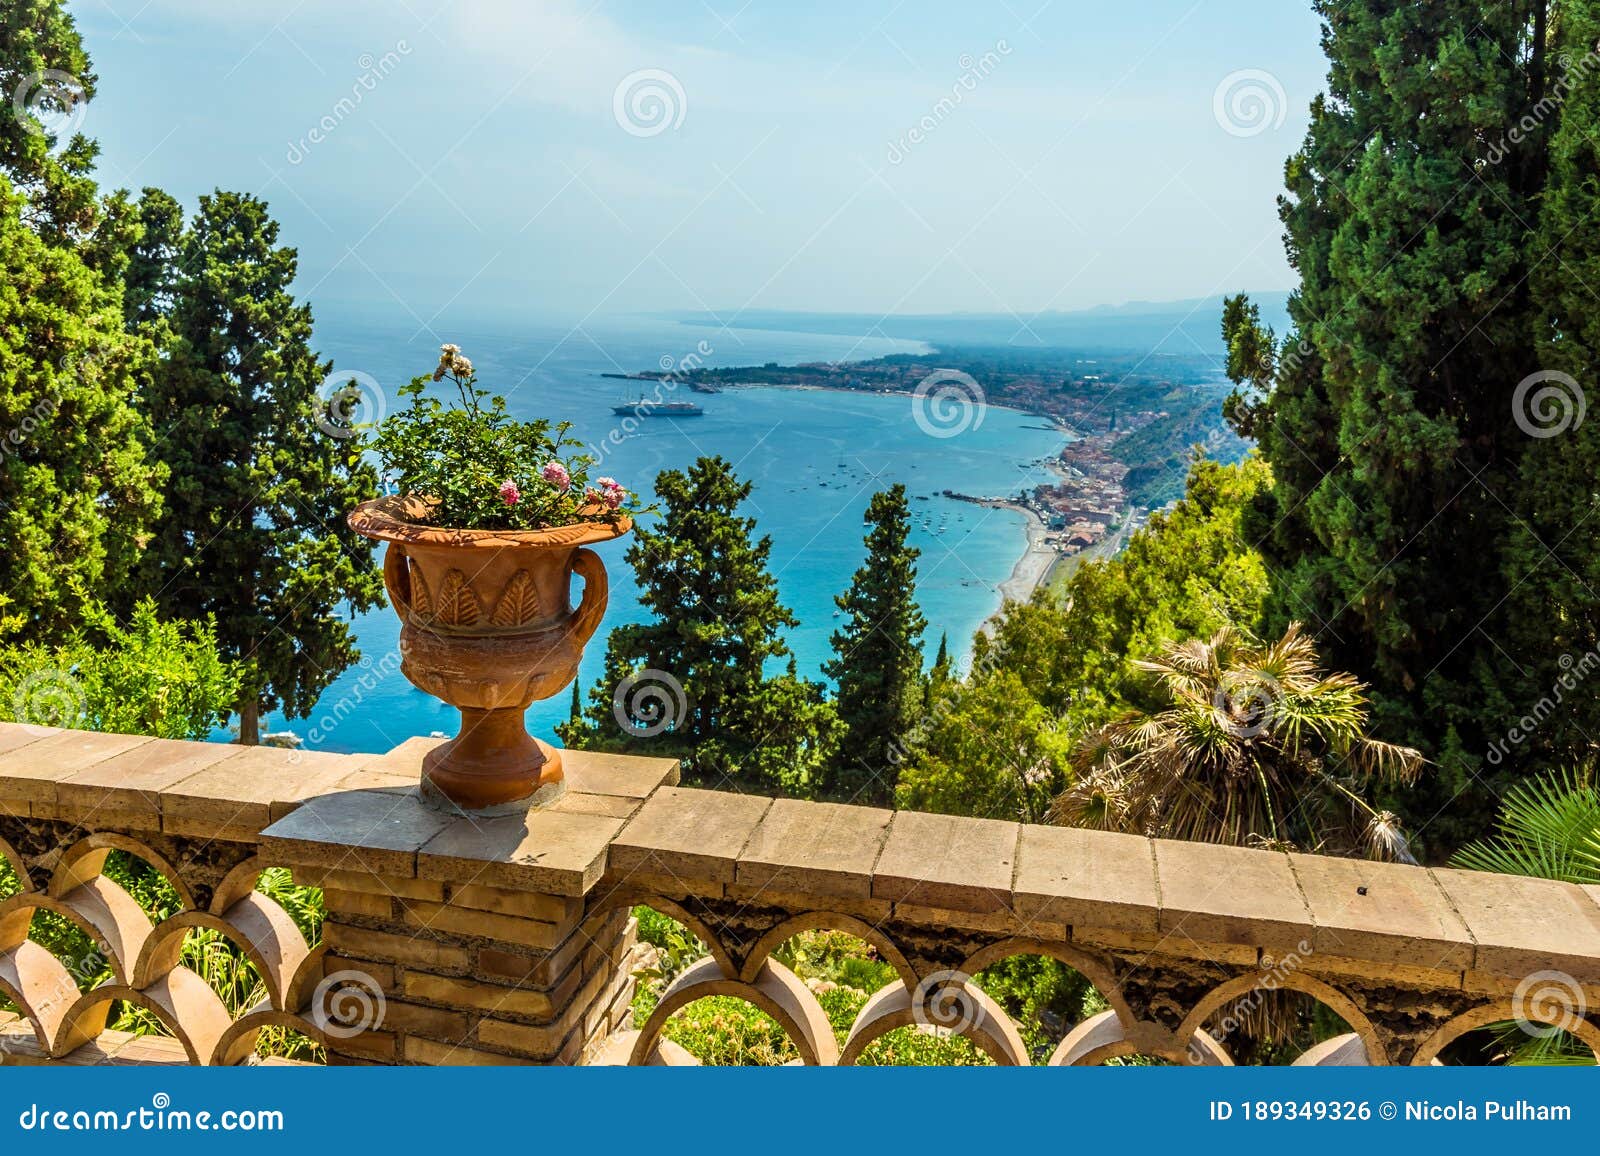 a view from a balcony in the garden of villa comunale over the shoreline of taormina, sicily